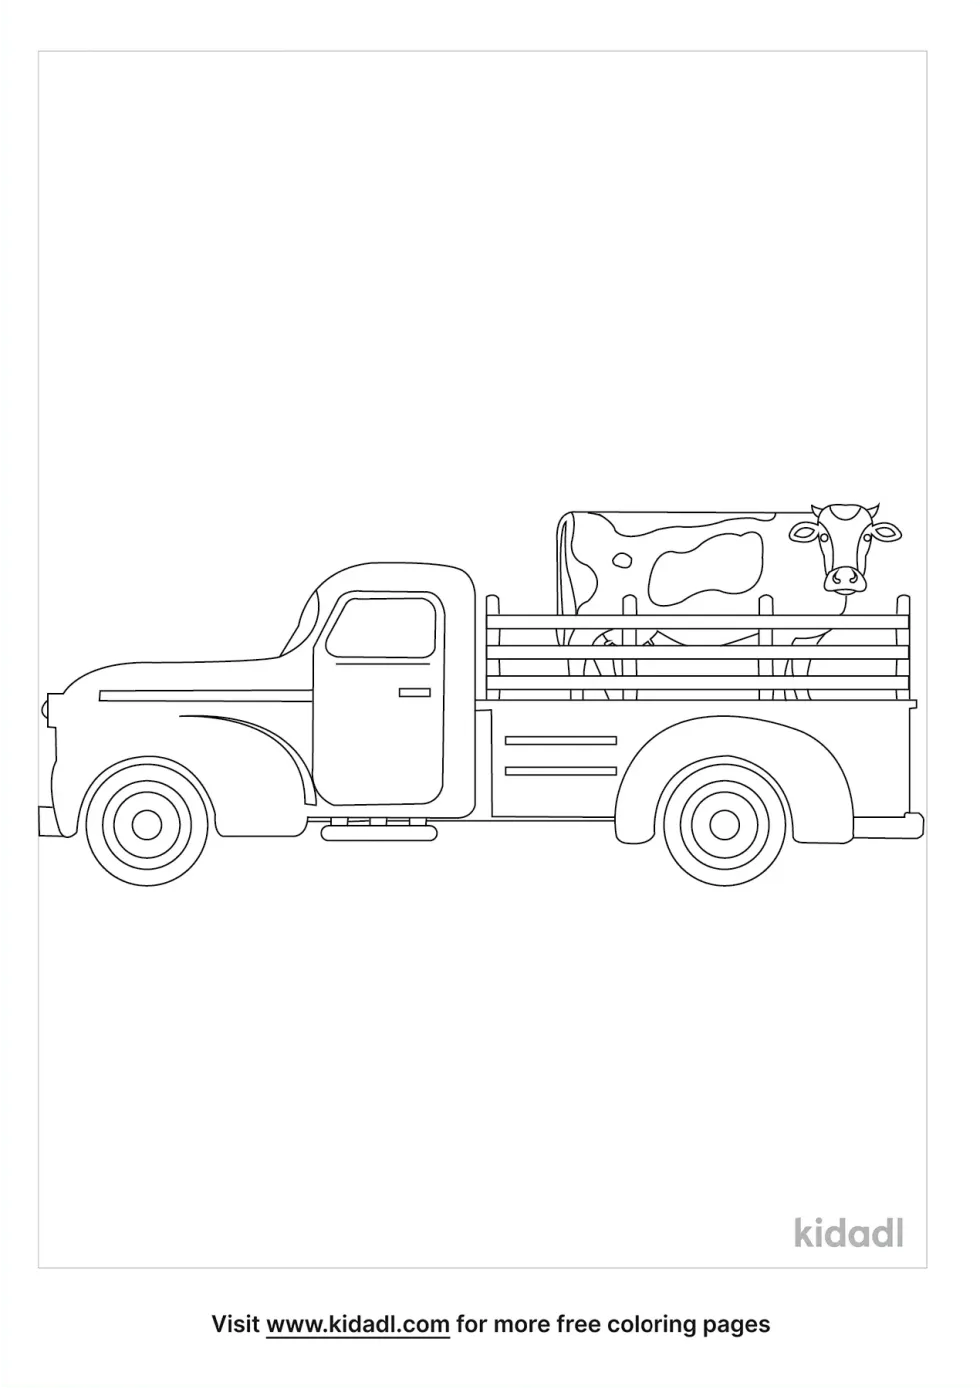 Cow Trailer Coloring Page